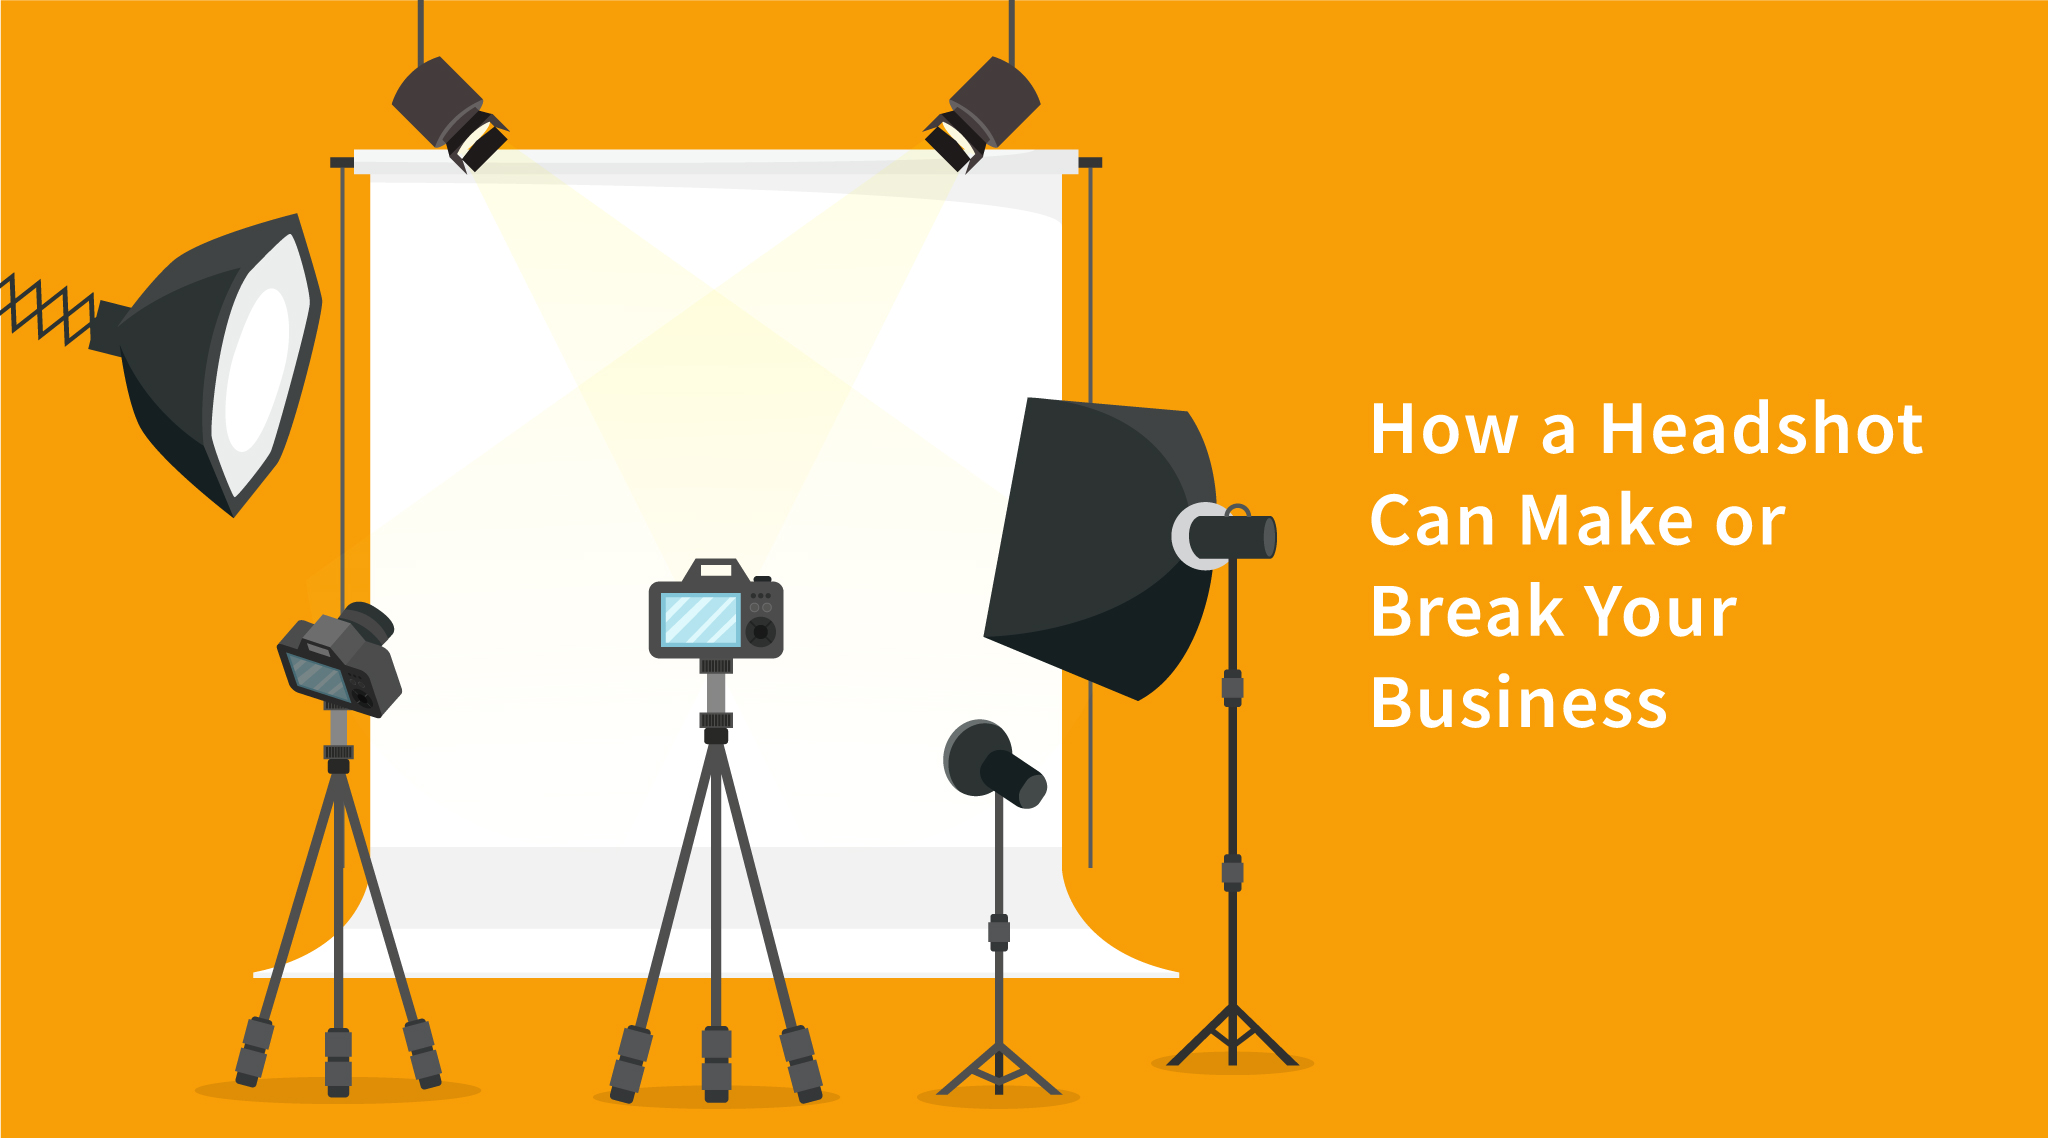 How a Headshot Can Make Or Break Your Business